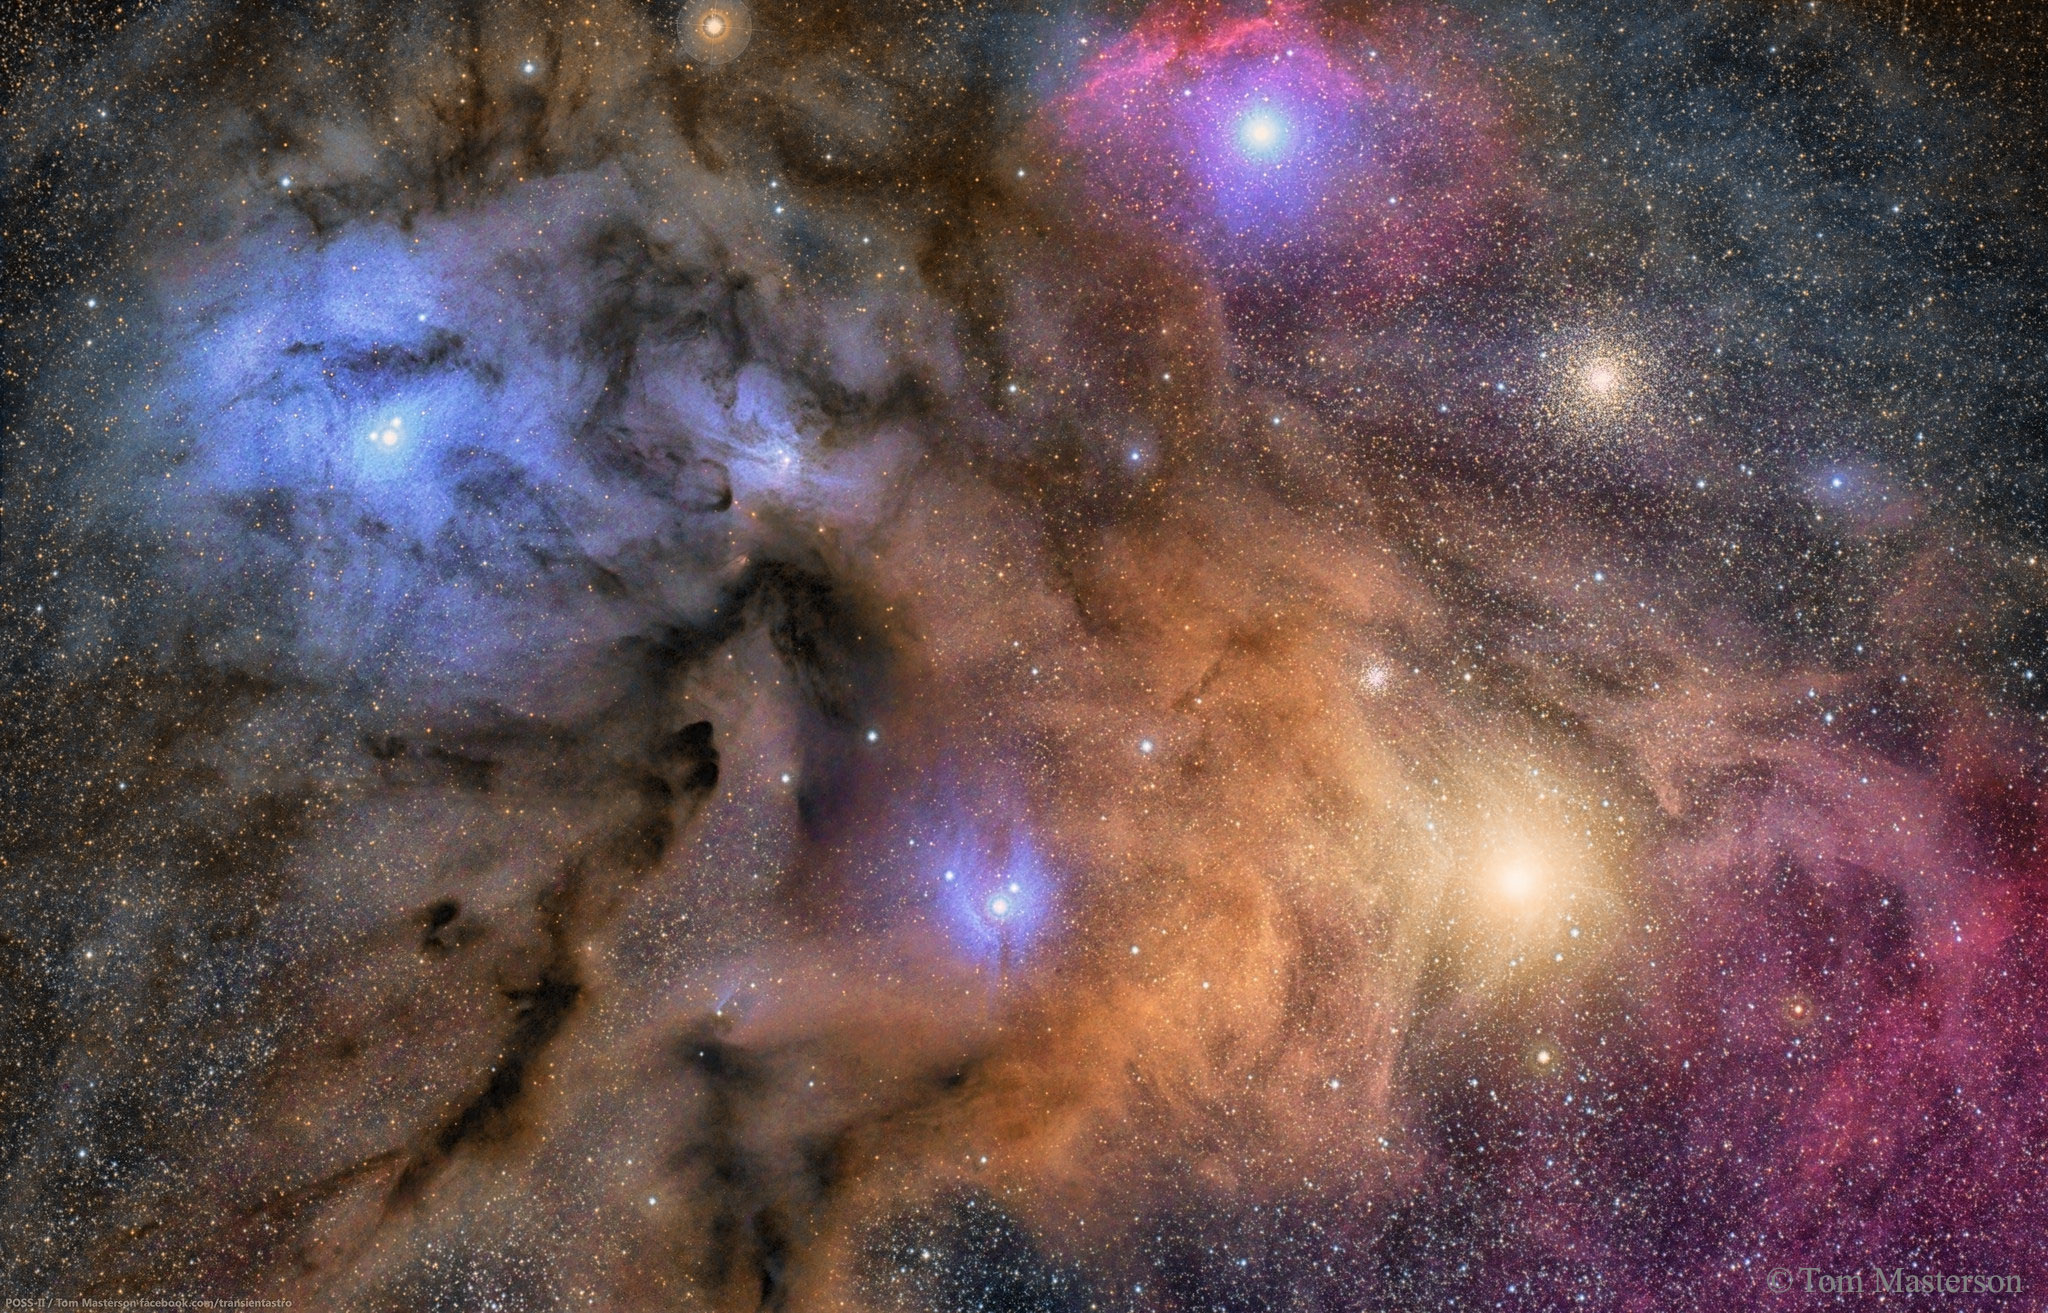 APOD: 2016 July 5 - The Colorful Clouds of Rho Ophiuchi